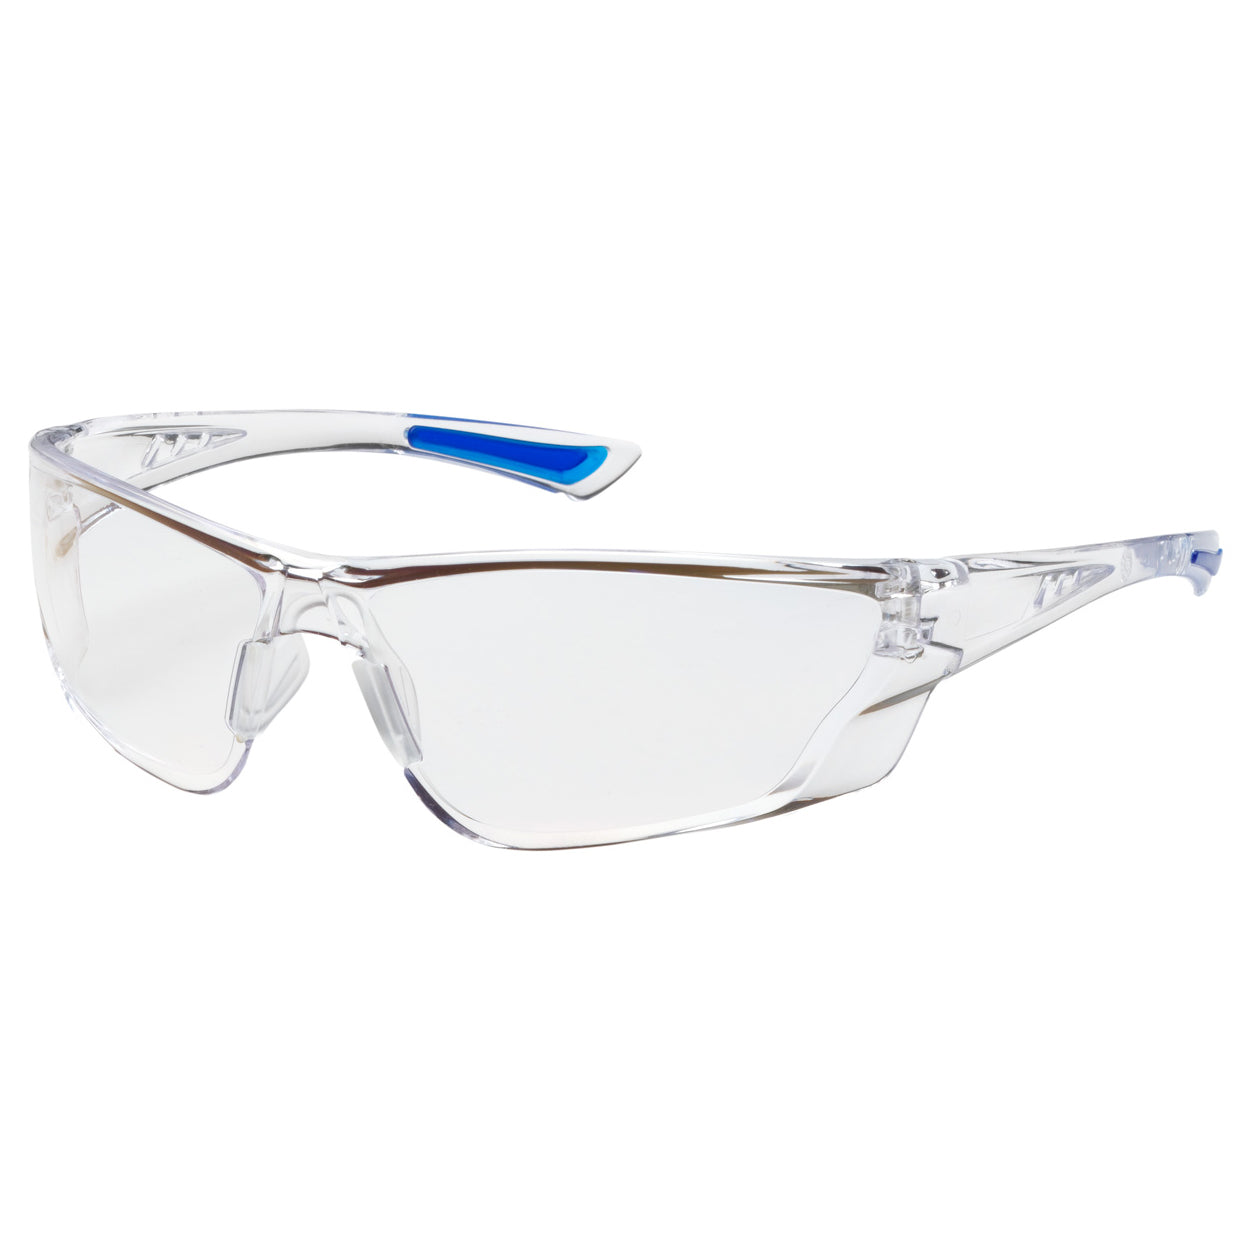 Bouton 250-32 Series Recon Safety Glasses-eSafety Supplies, Inc